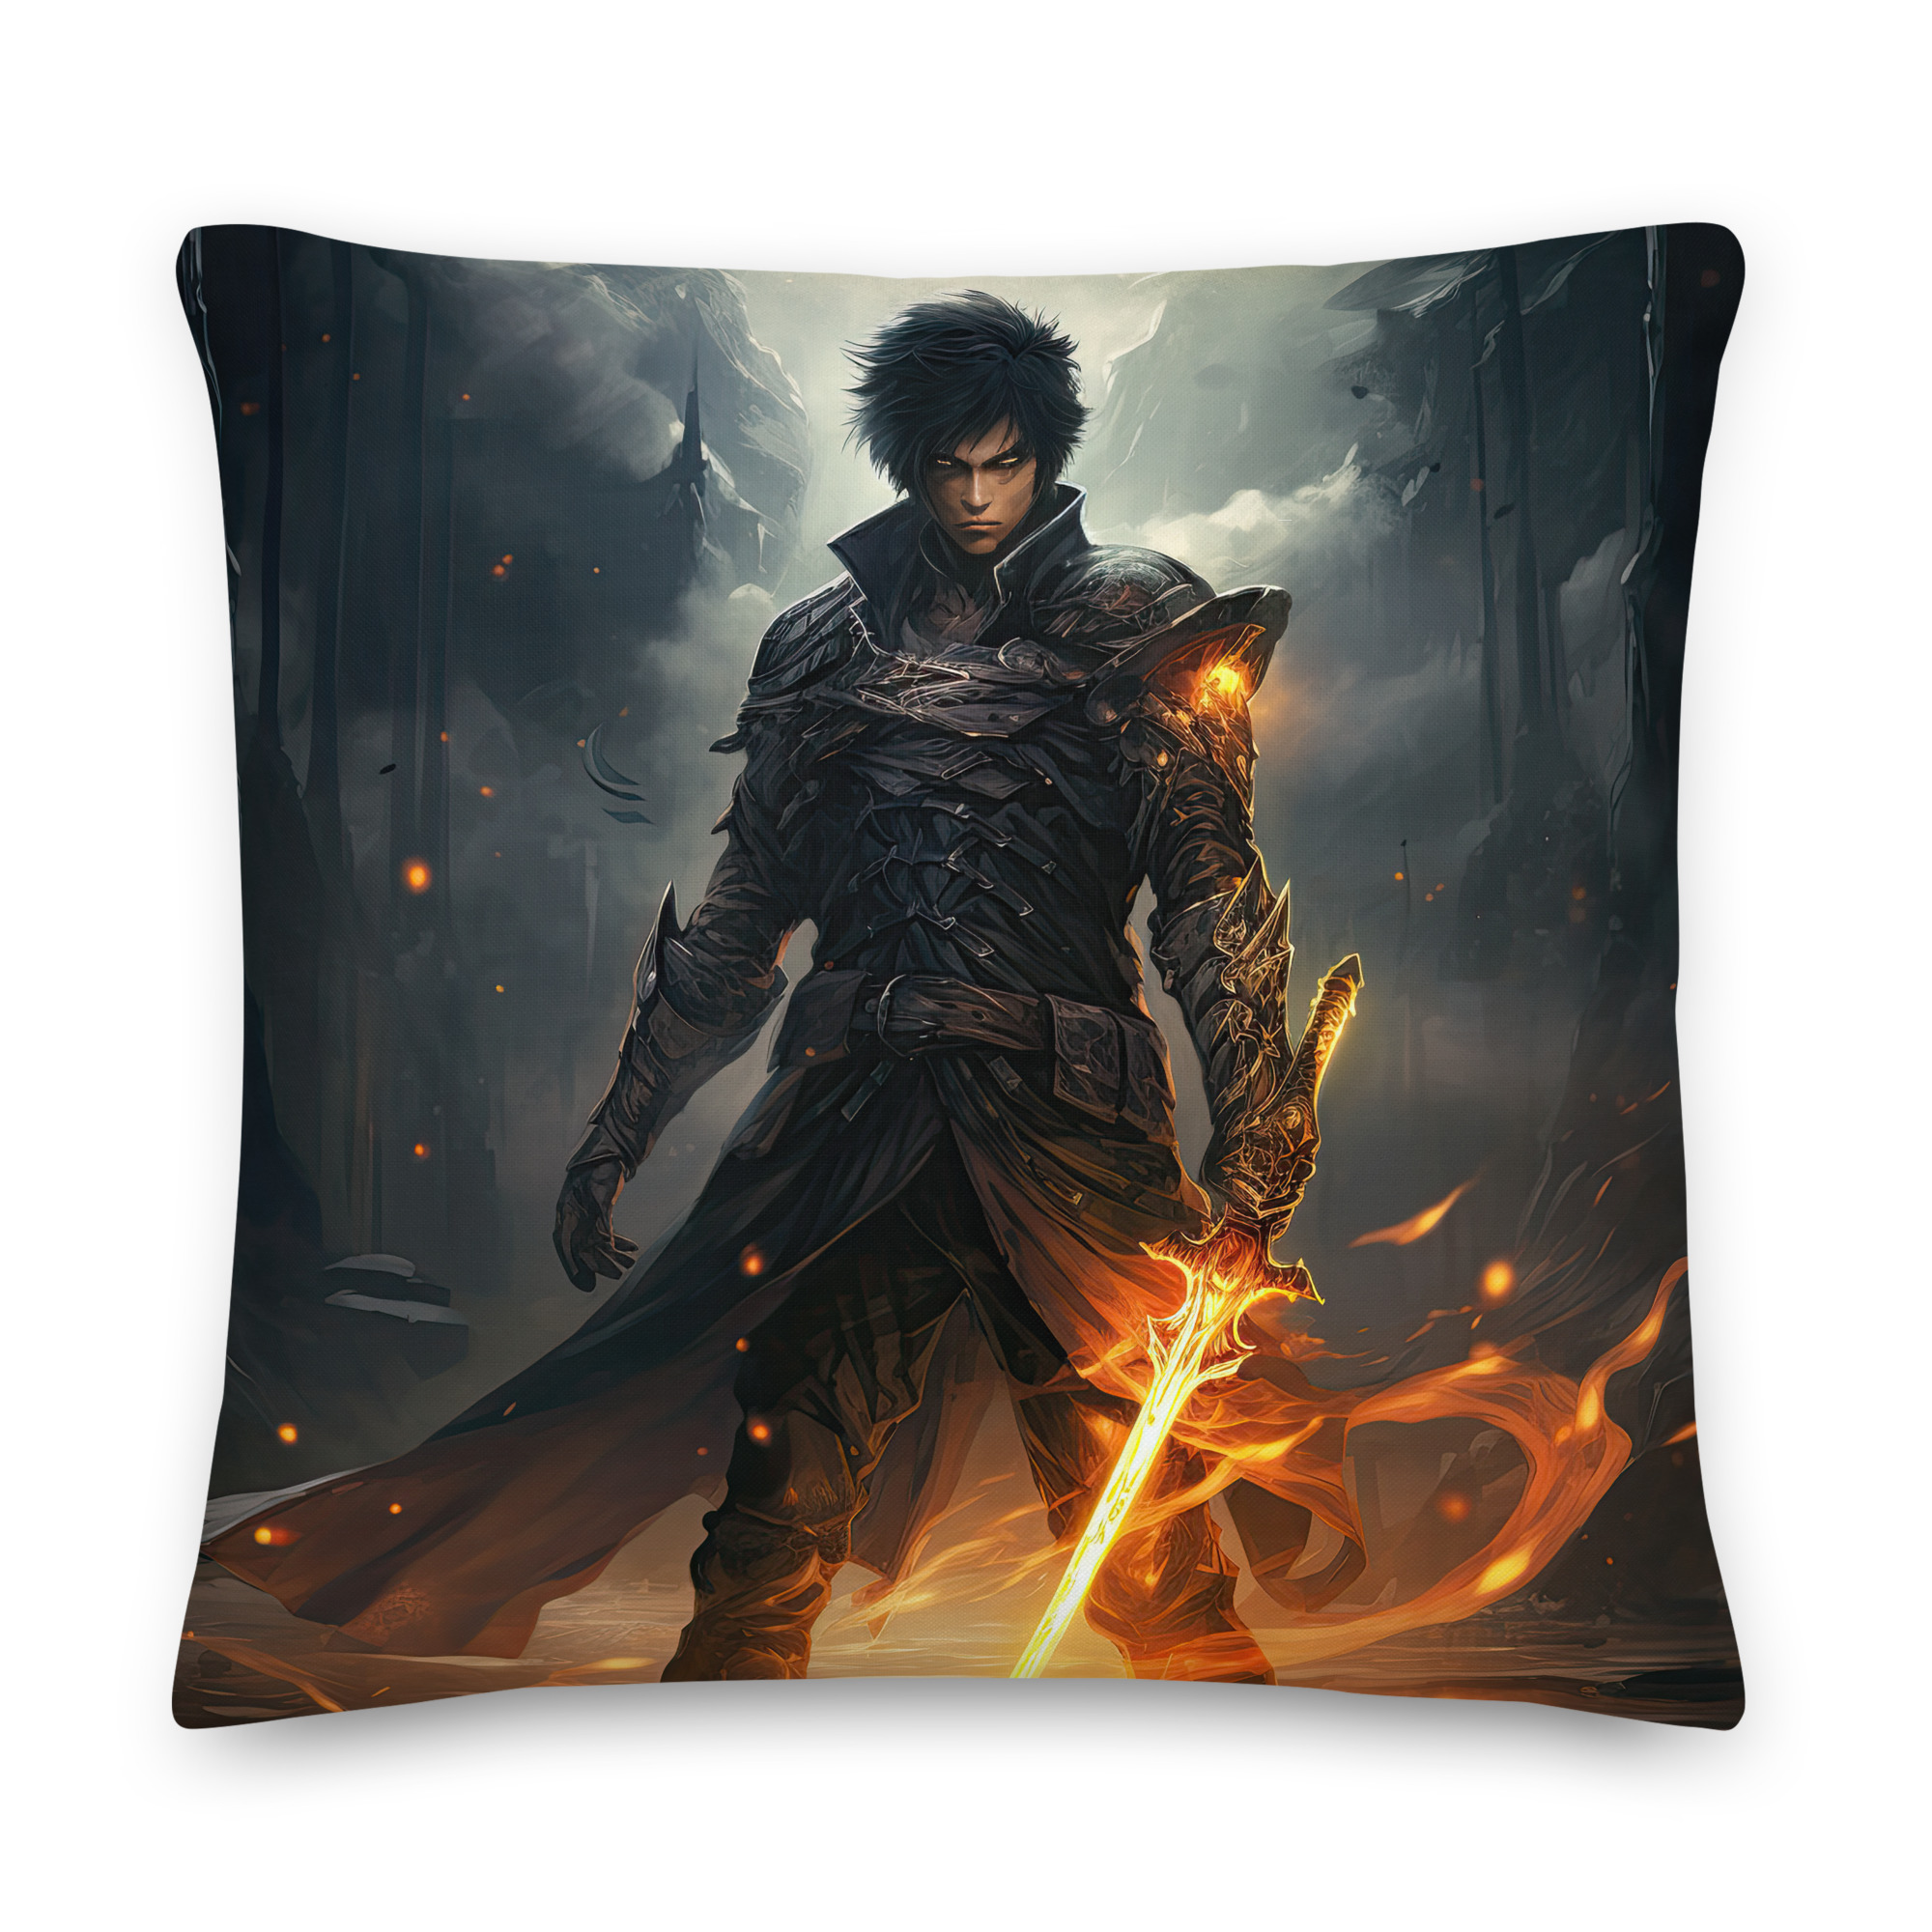 Male Anime Character – Flaming Sword Throw Pillow – 22×22